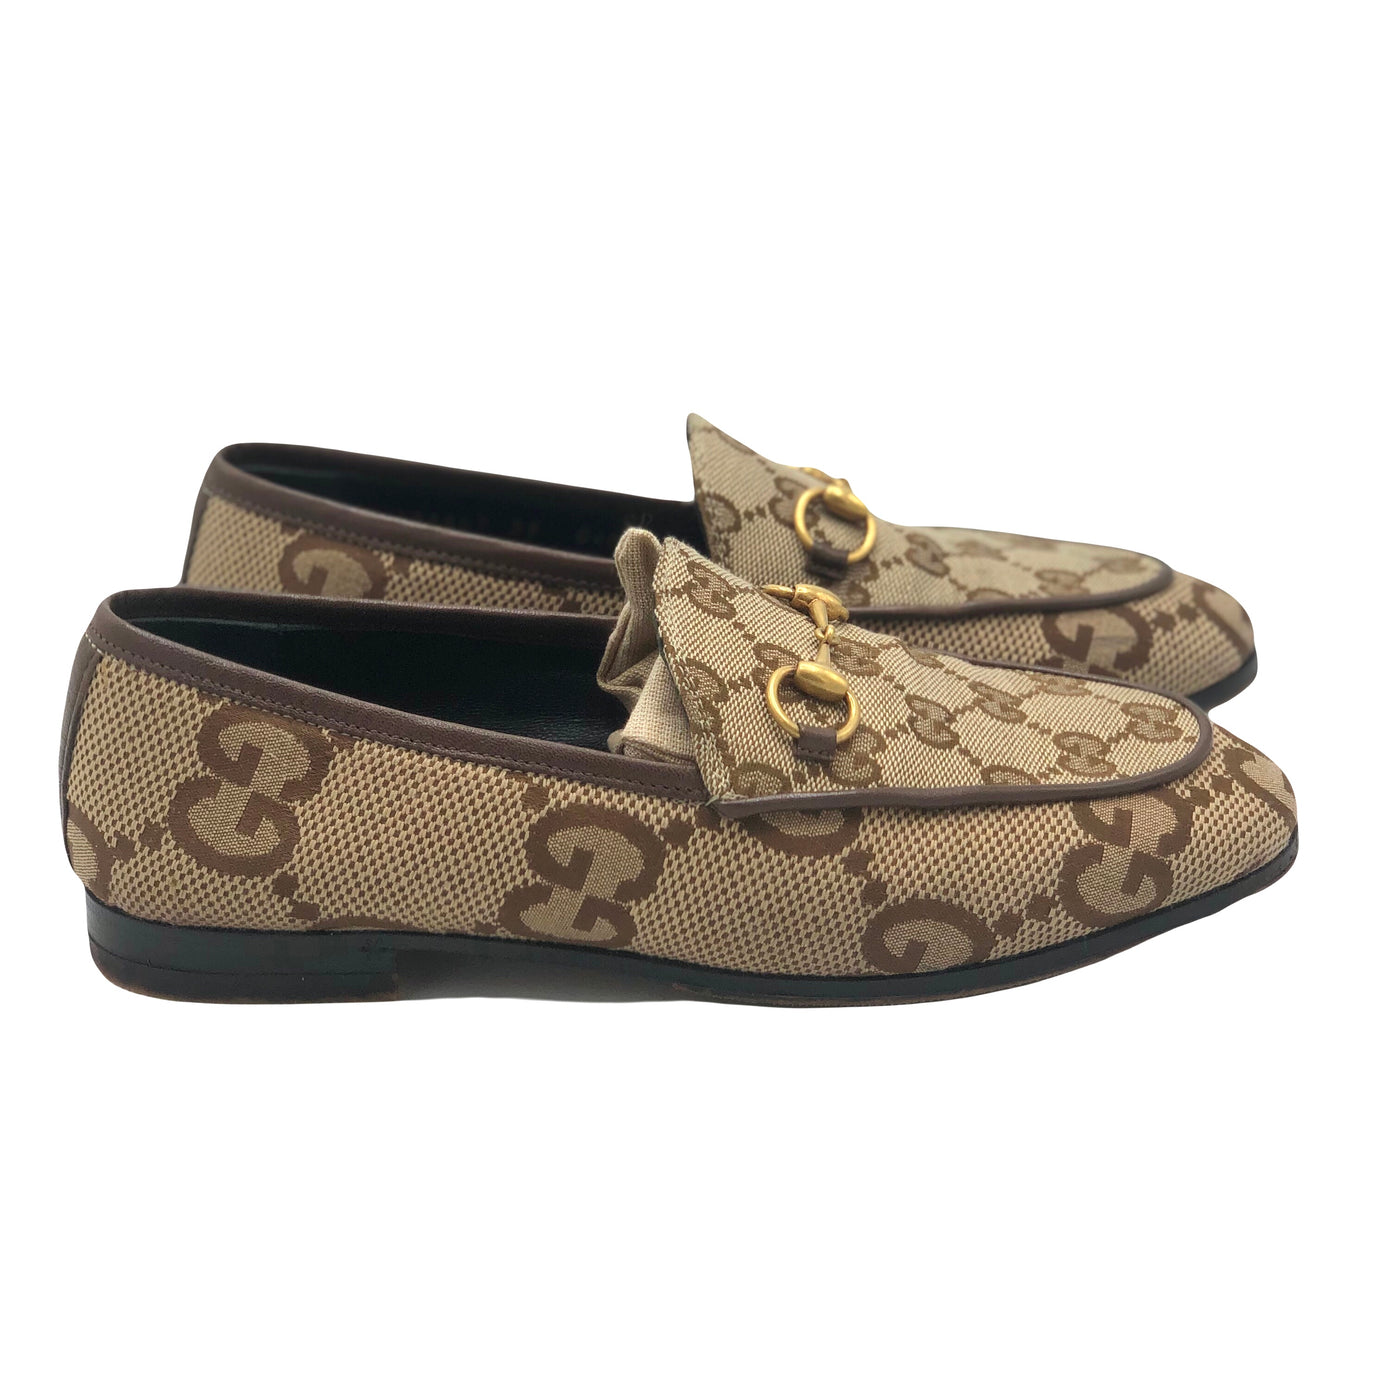 GUCCI GG Jacquard beige/brown Loafers size 36 RRP: £620